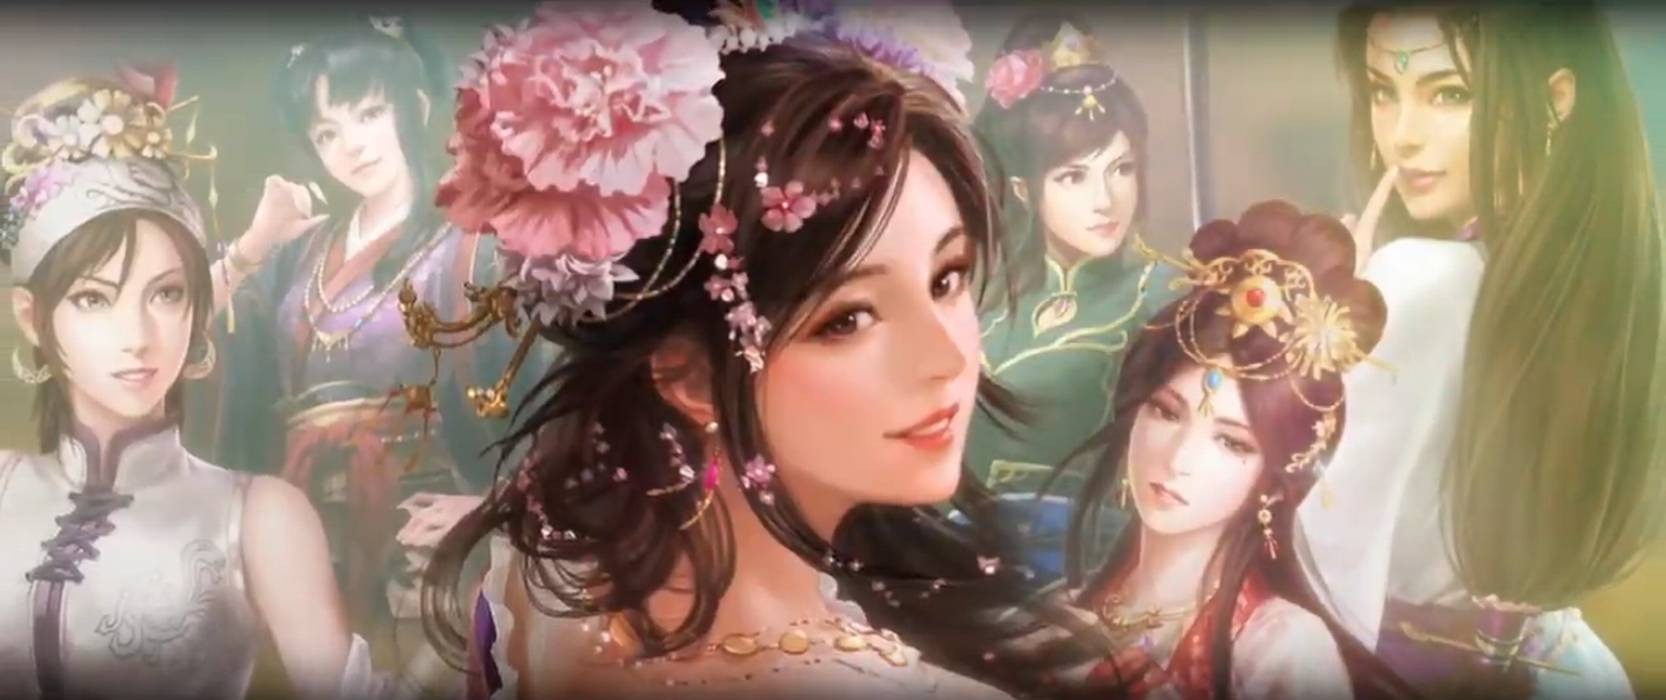 Historical Strategy Game Romance of the Three Kingdoms XIV Coming To Western Audiences In 2020